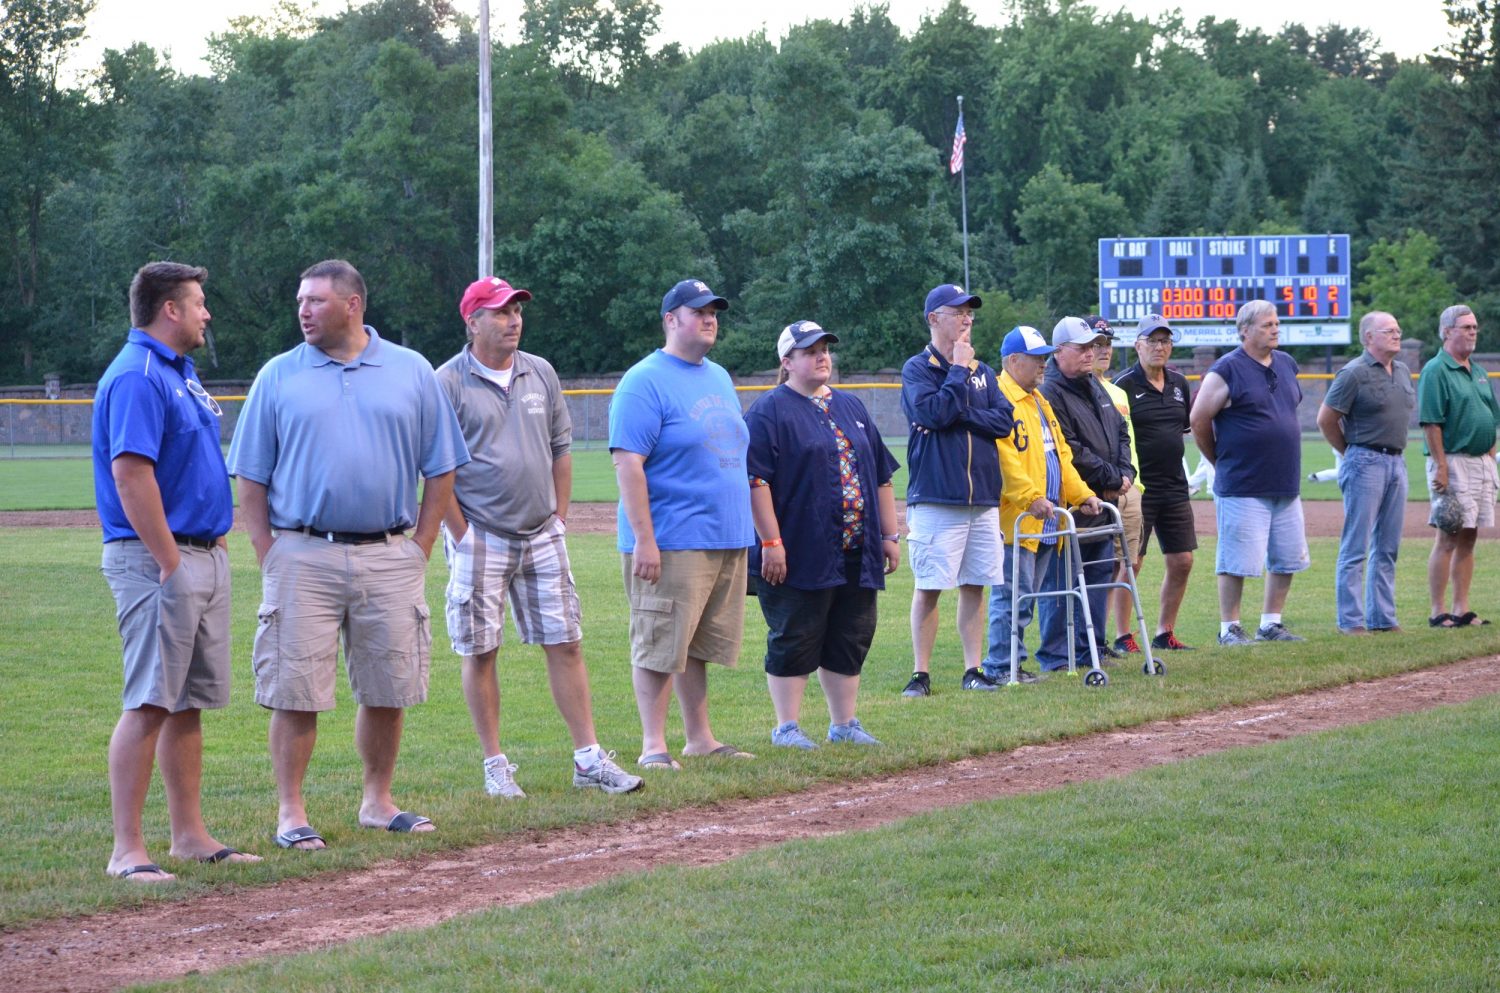 Merrill Baseball Hall of Fame introduces new members